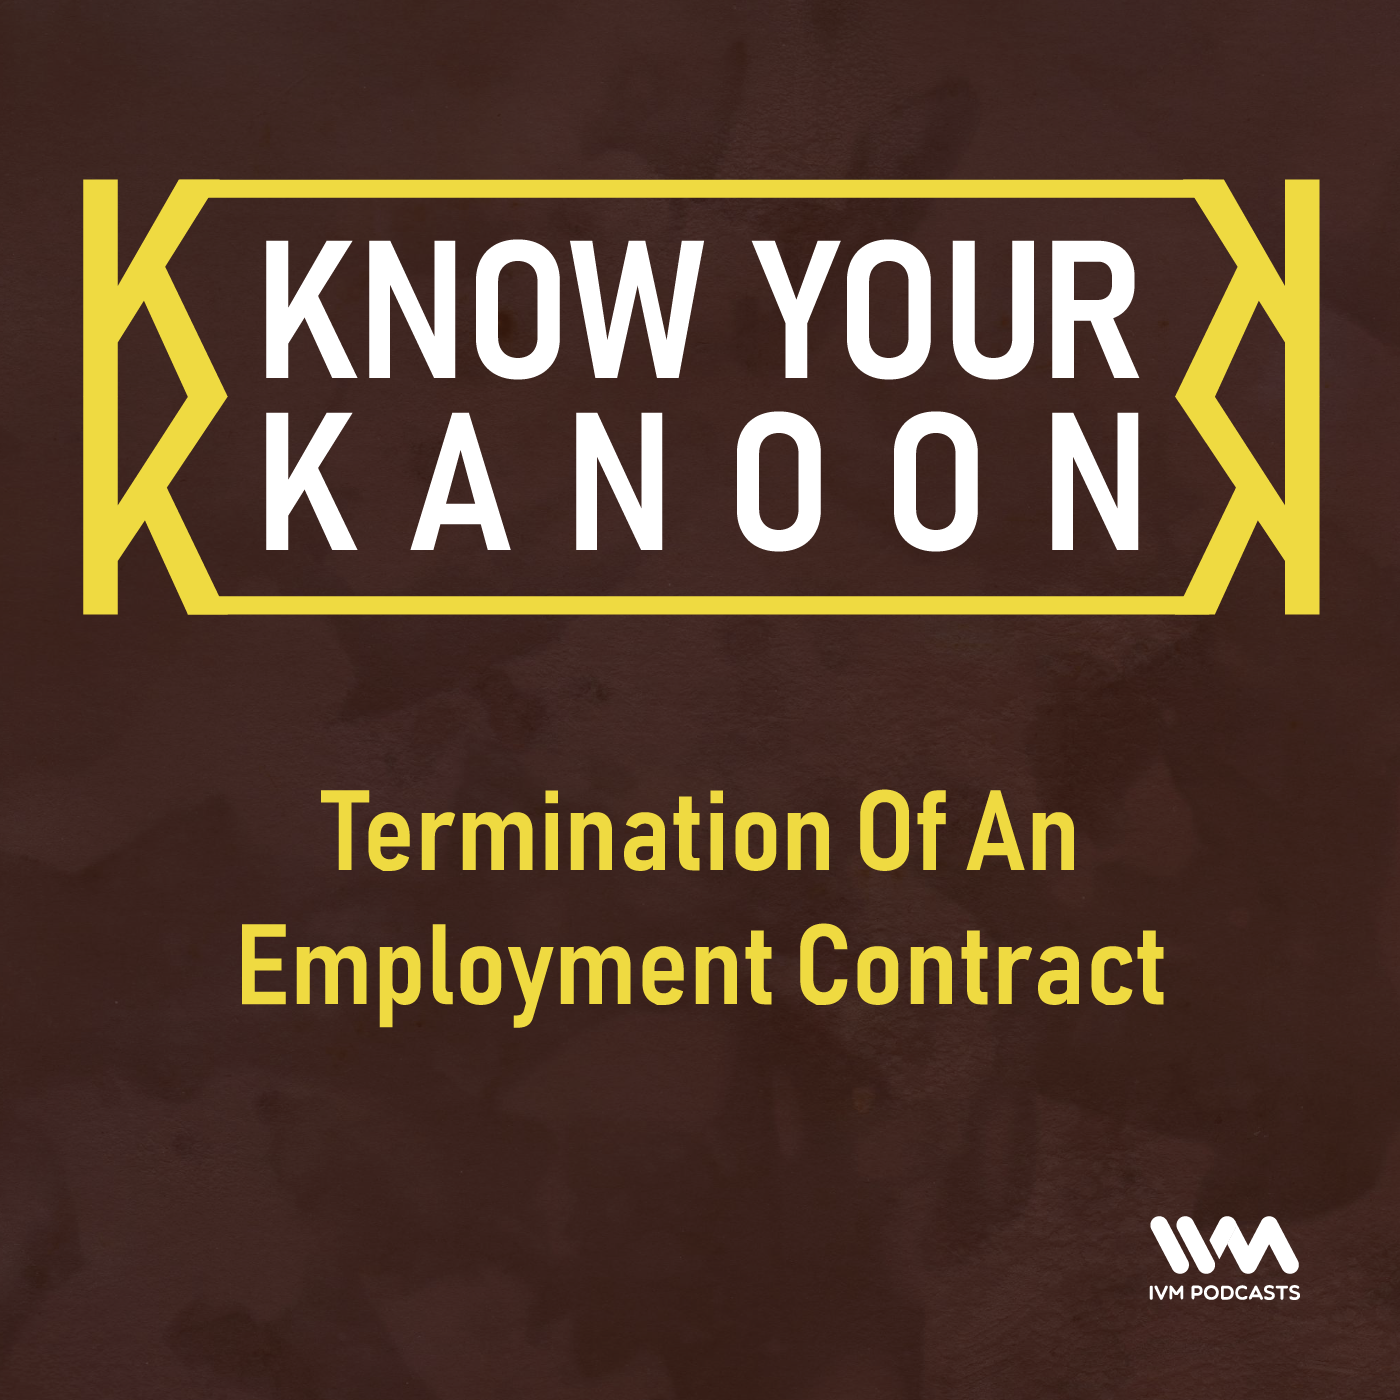 Ep. 21: Termination Of An Employment Contract